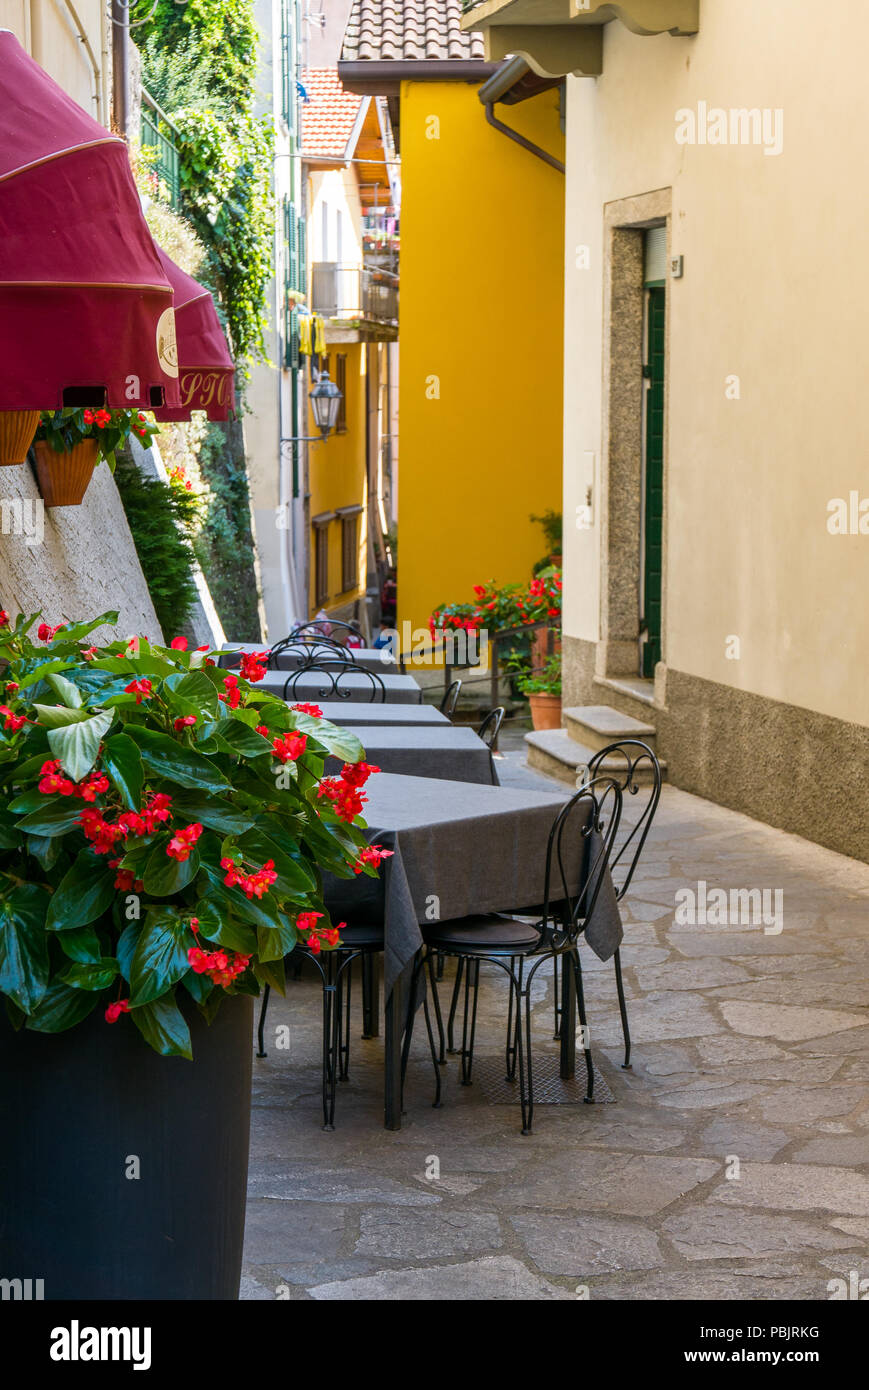 tables, chairs and flowers in the small alley of Varenna, Italy Stock Photo